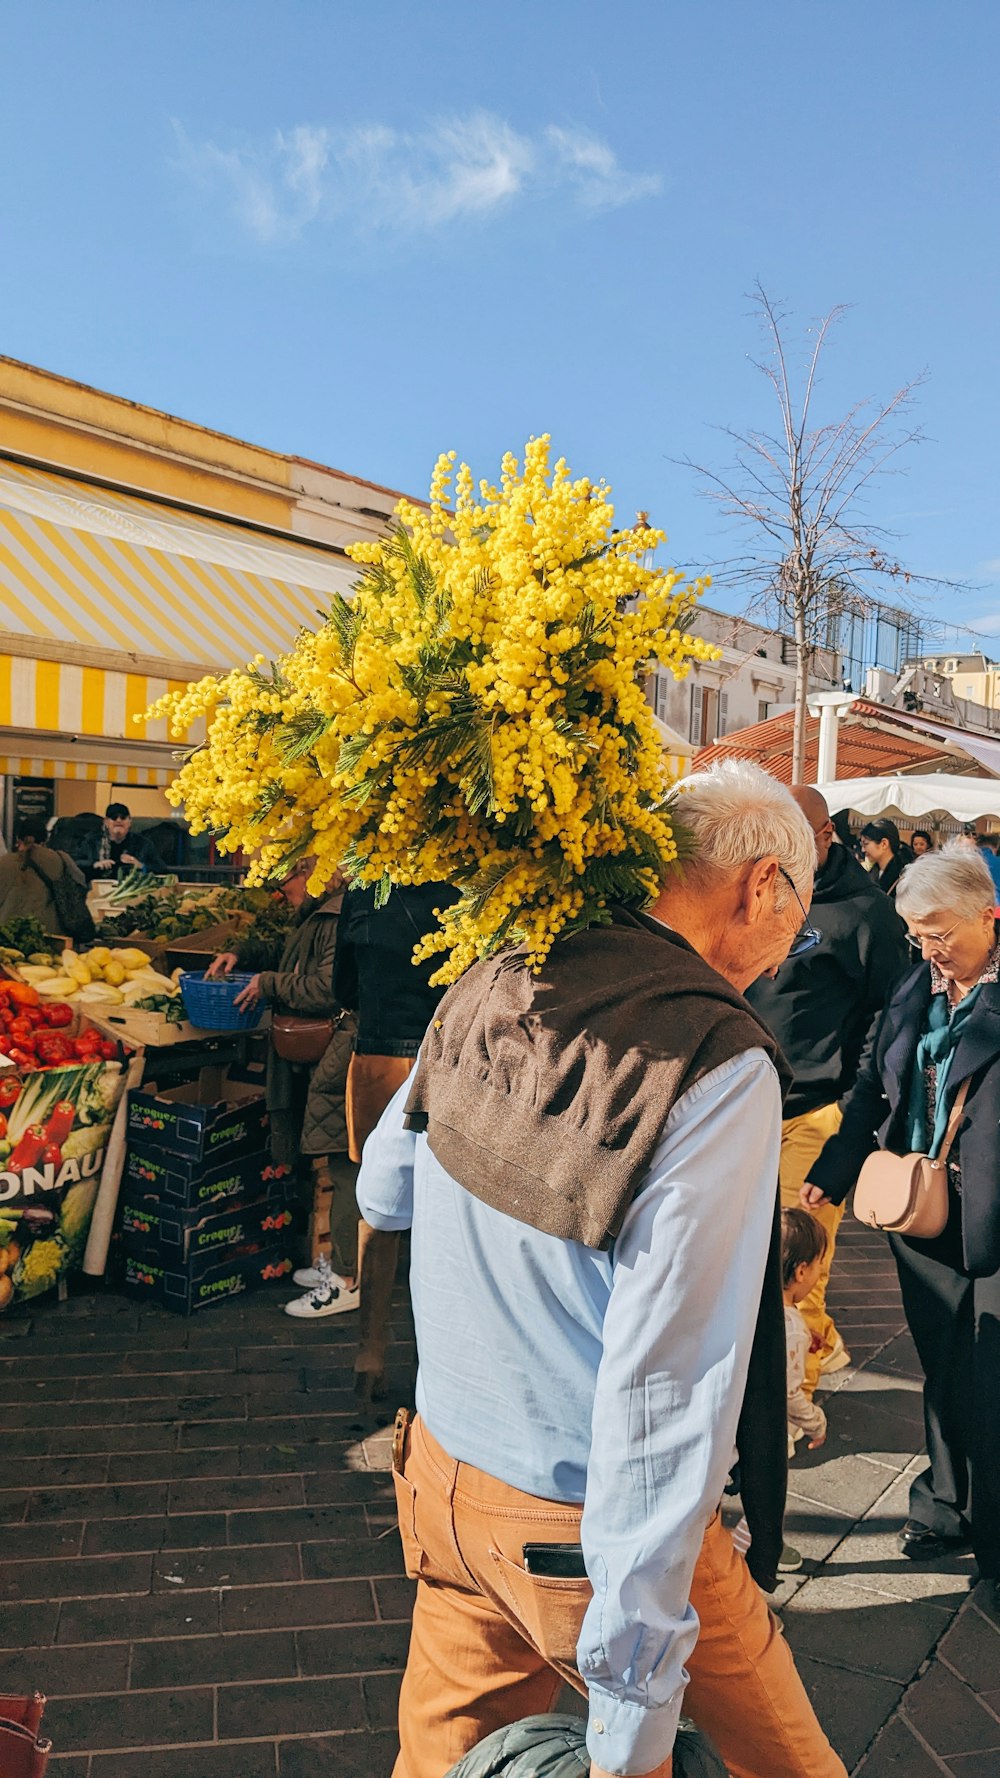 a man walking down a street carrying a bunch of flowers